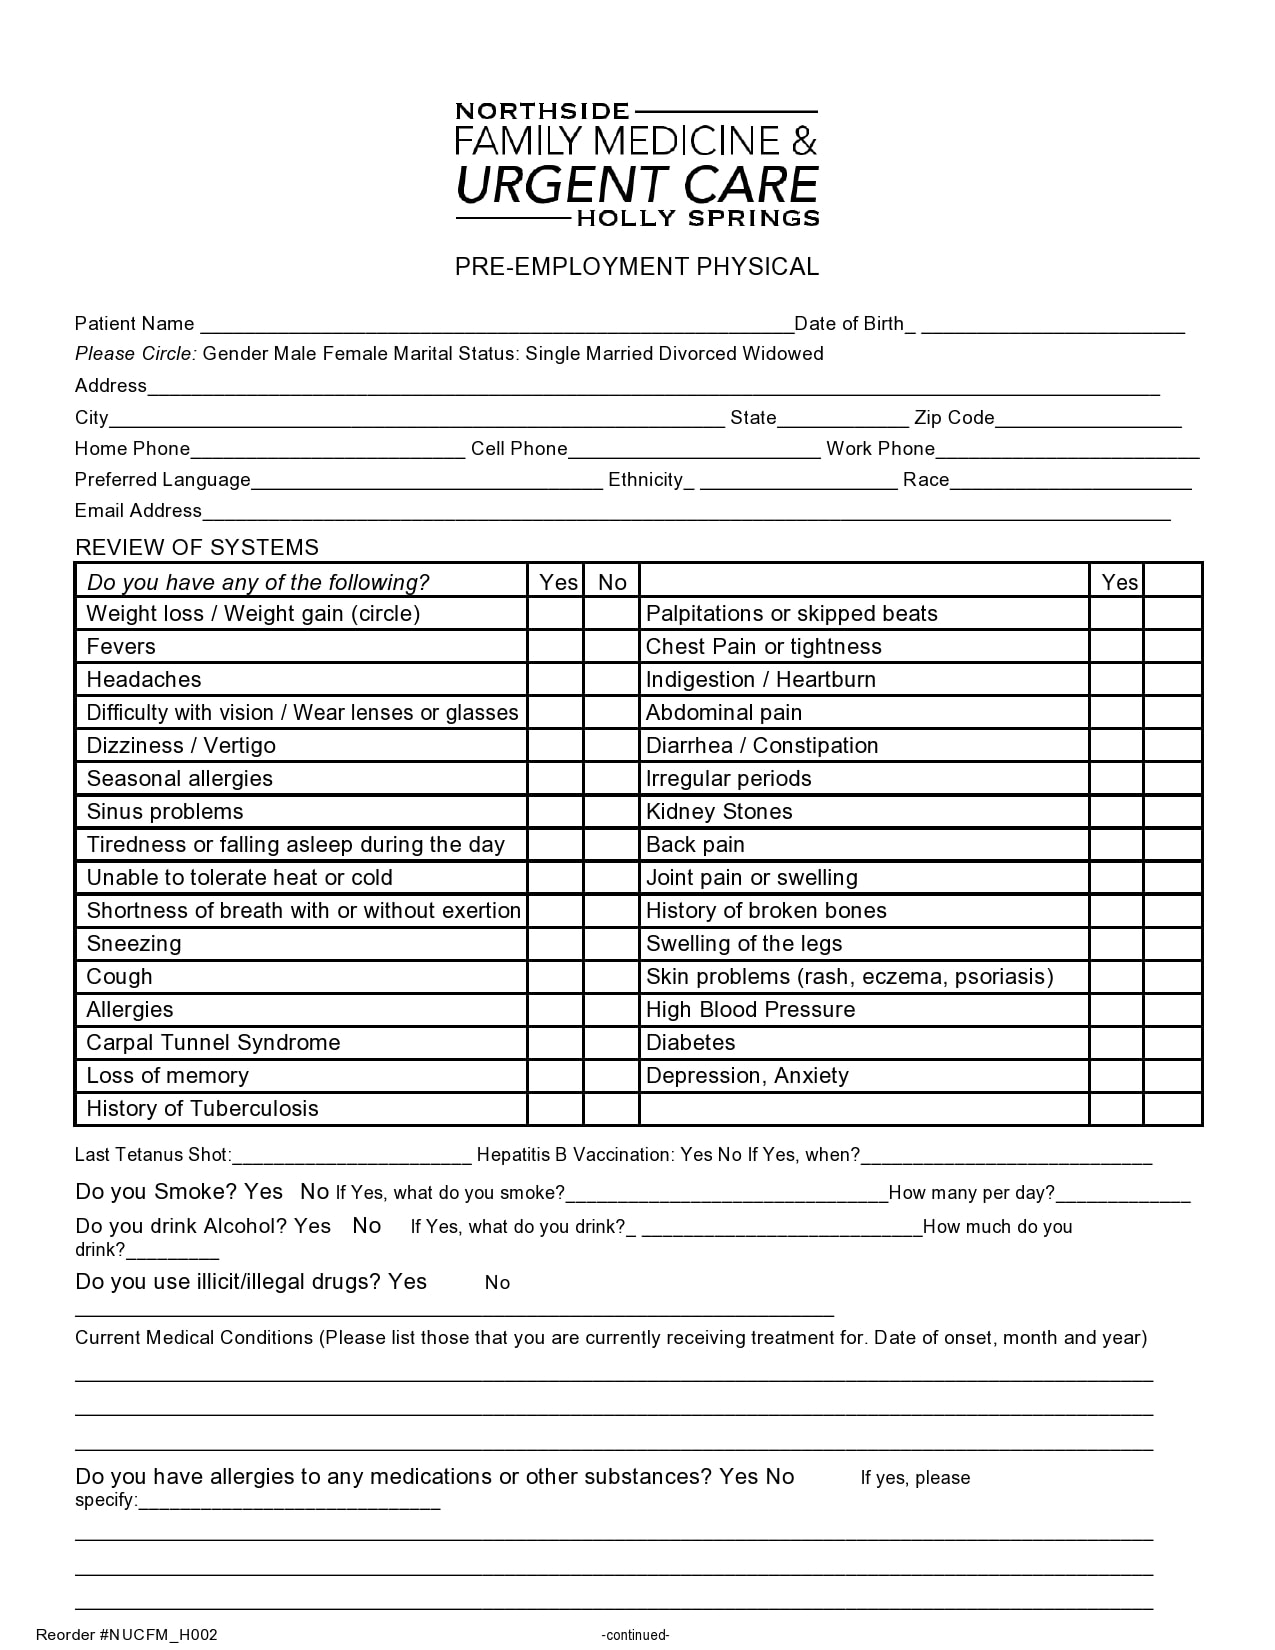 pre-employment-physical-forms-printable-printable-forms-free-online